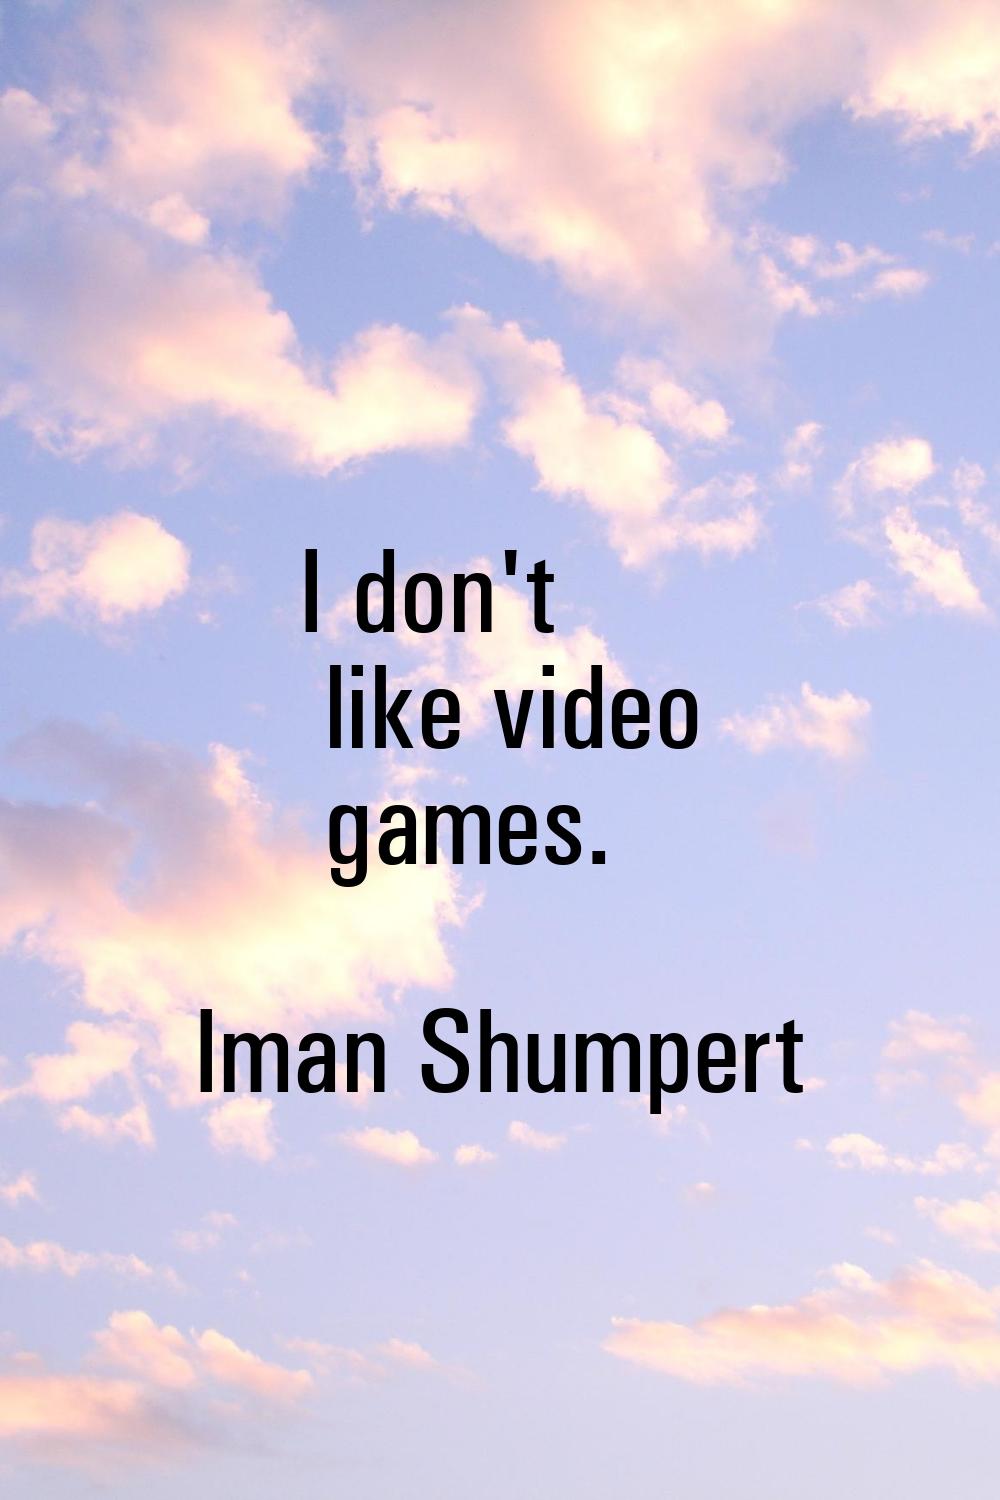 I don't like video games.